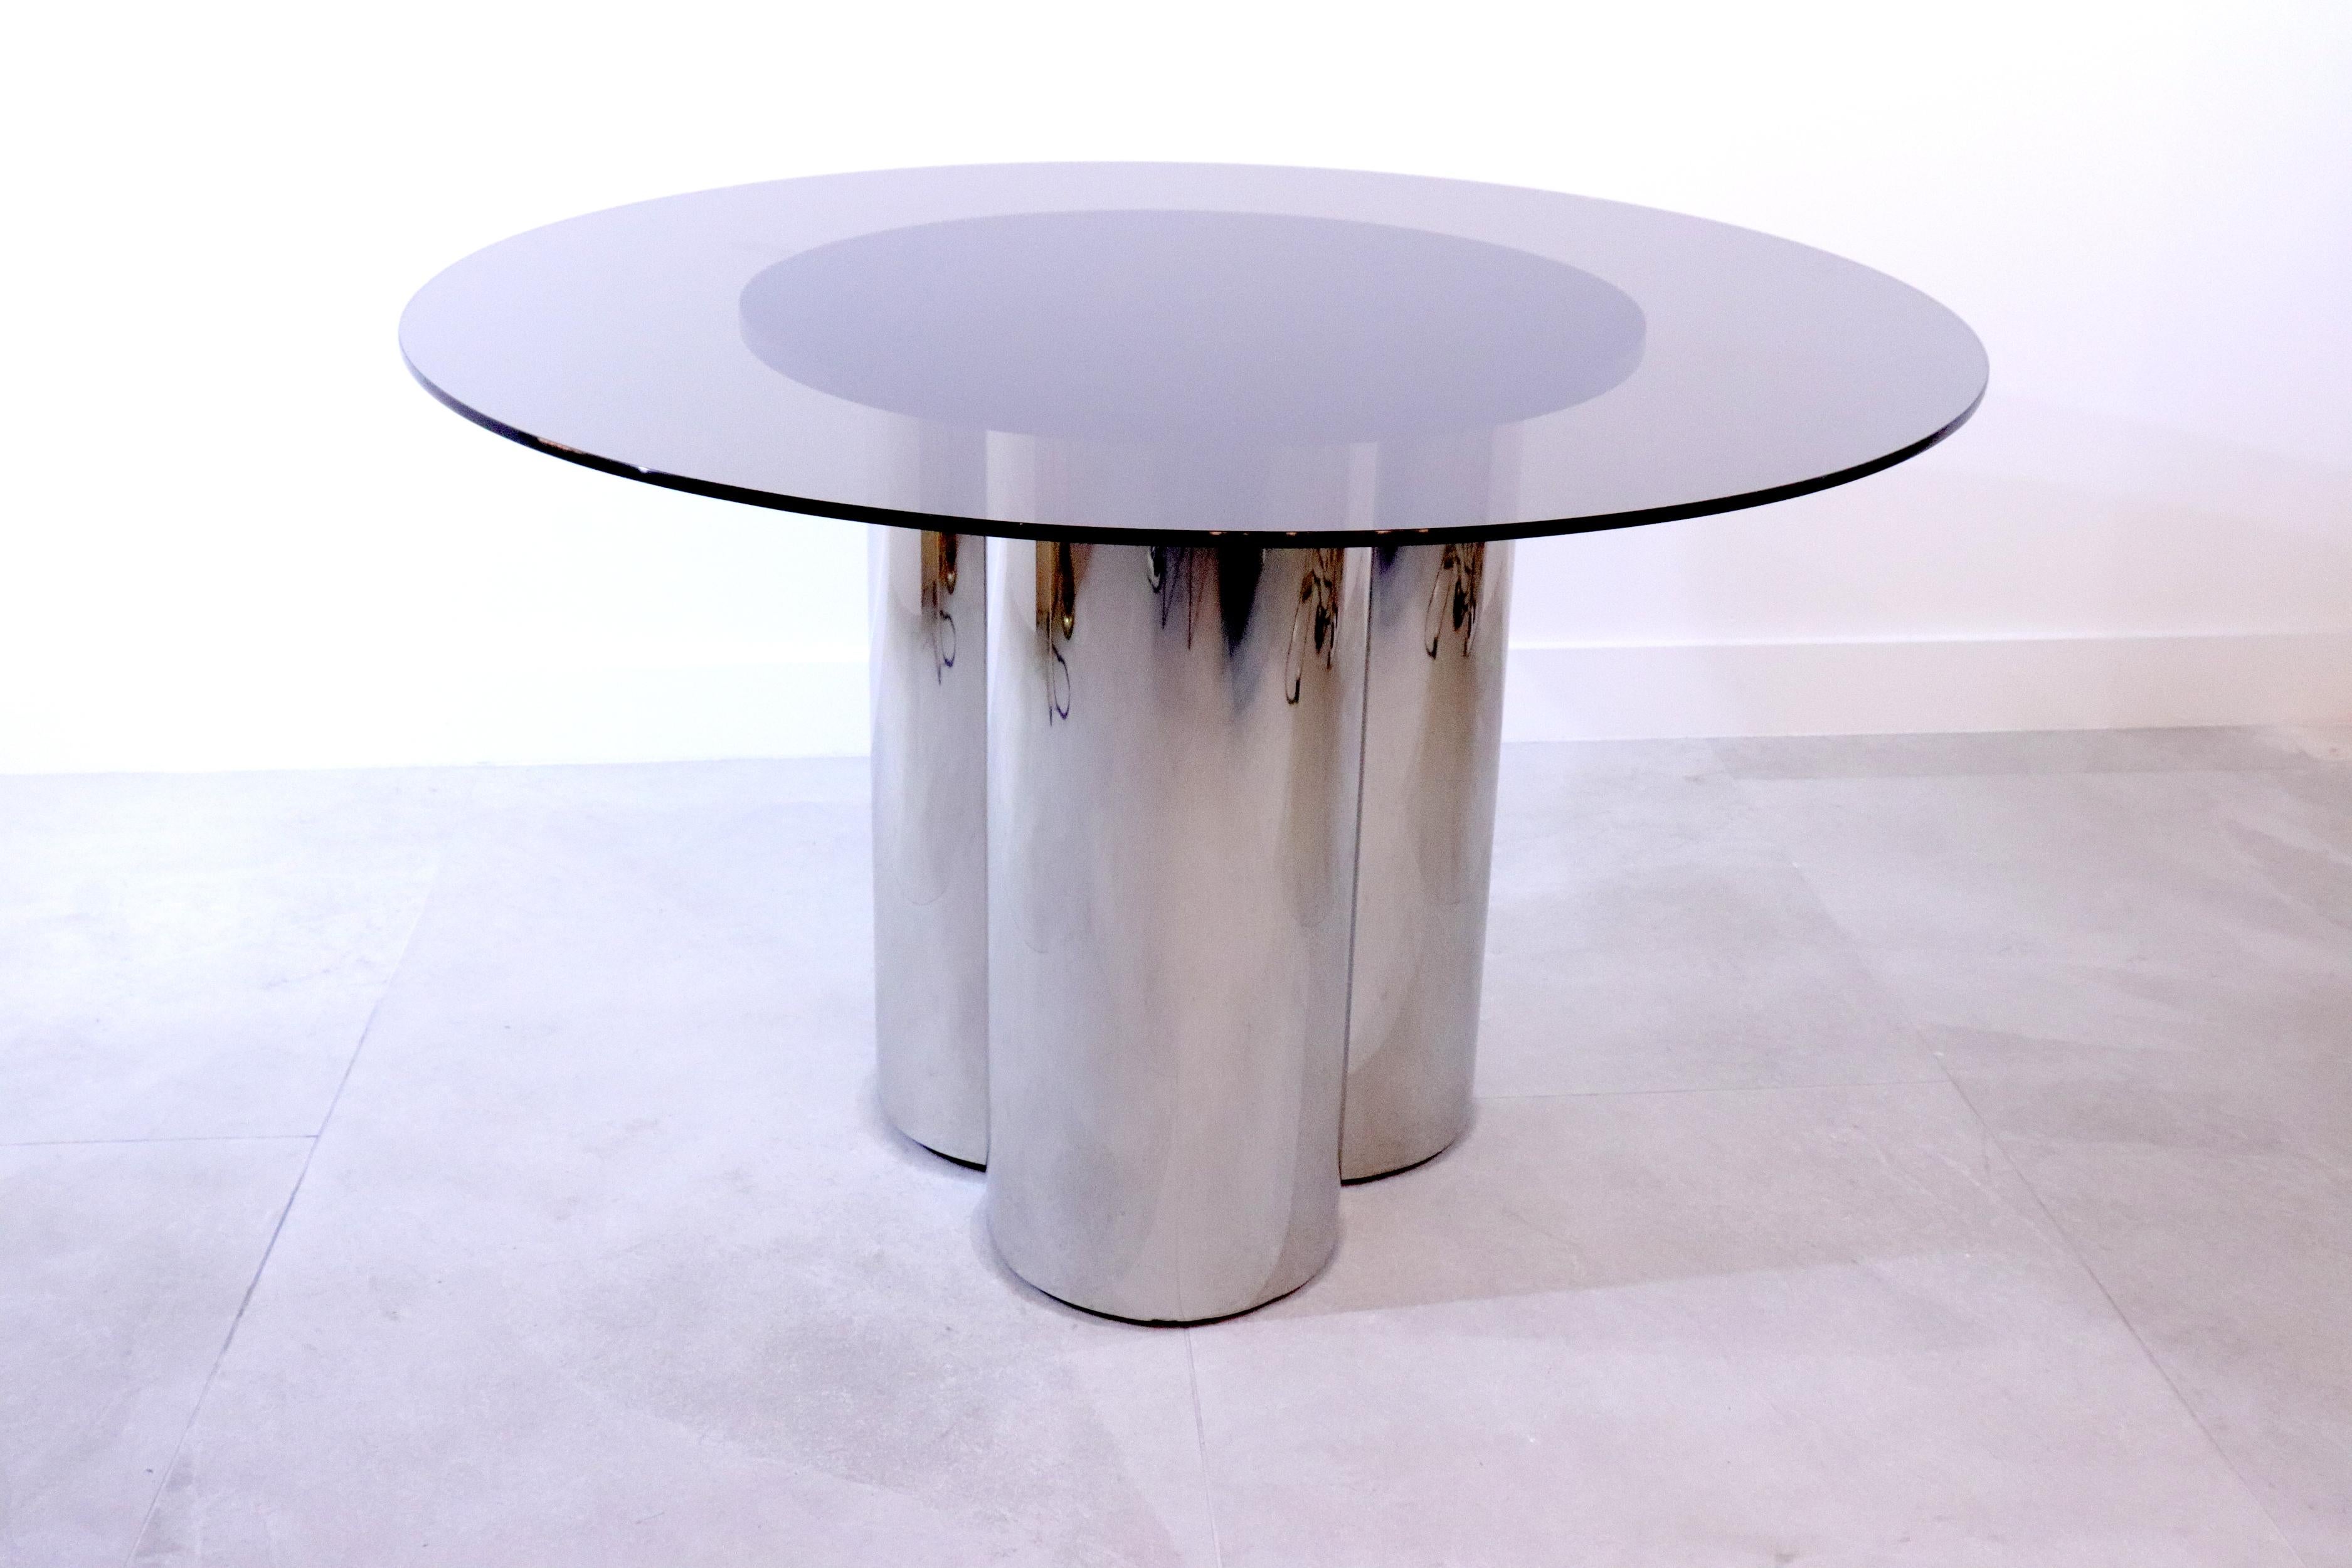 A stylish furnishing, this dining table is for lovers of Modernist / antique look. The reflective finish of the glass top and curved chrome base are complimentary to the rest of the furnishings in the room of your choice, adding depth and colour to